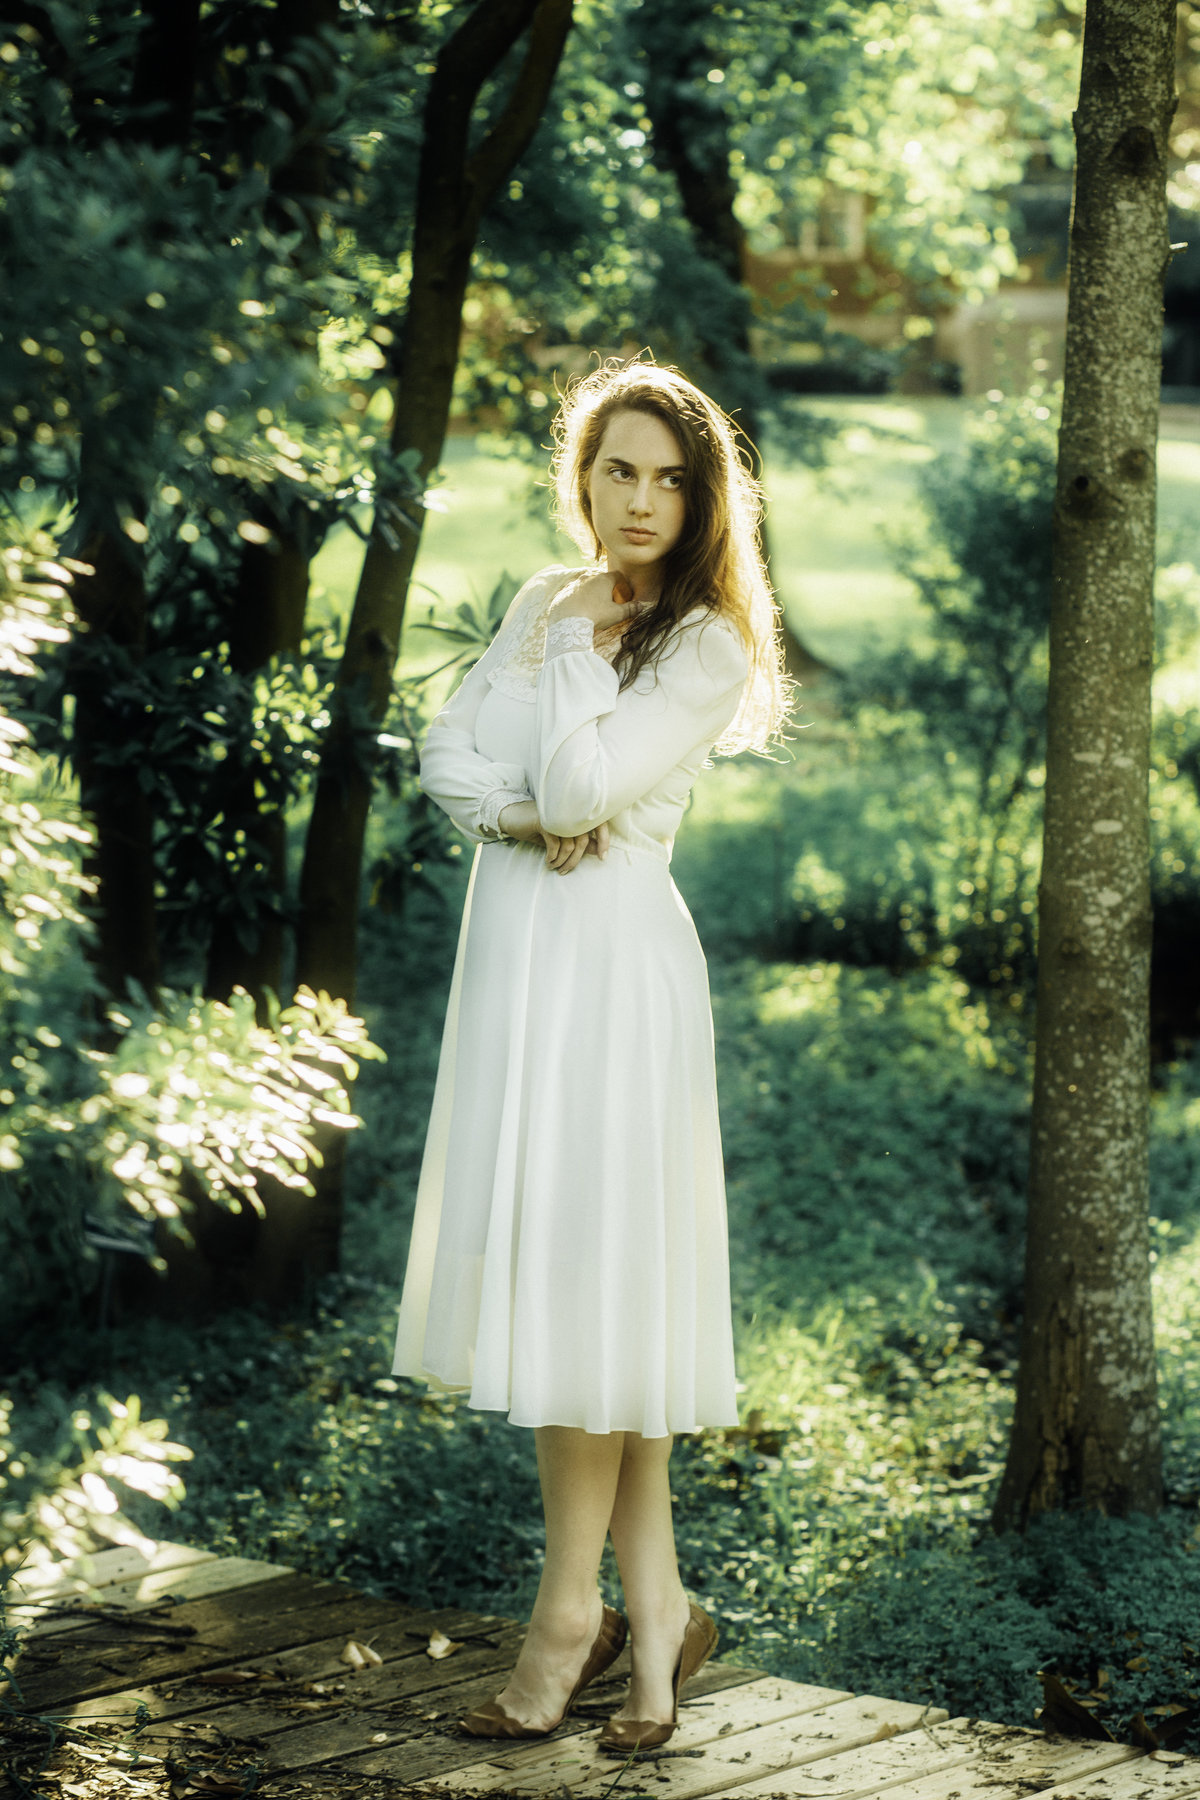 Portrait Photo Of Young Woman In White Dress In The Middle Of Trees Los Angeles